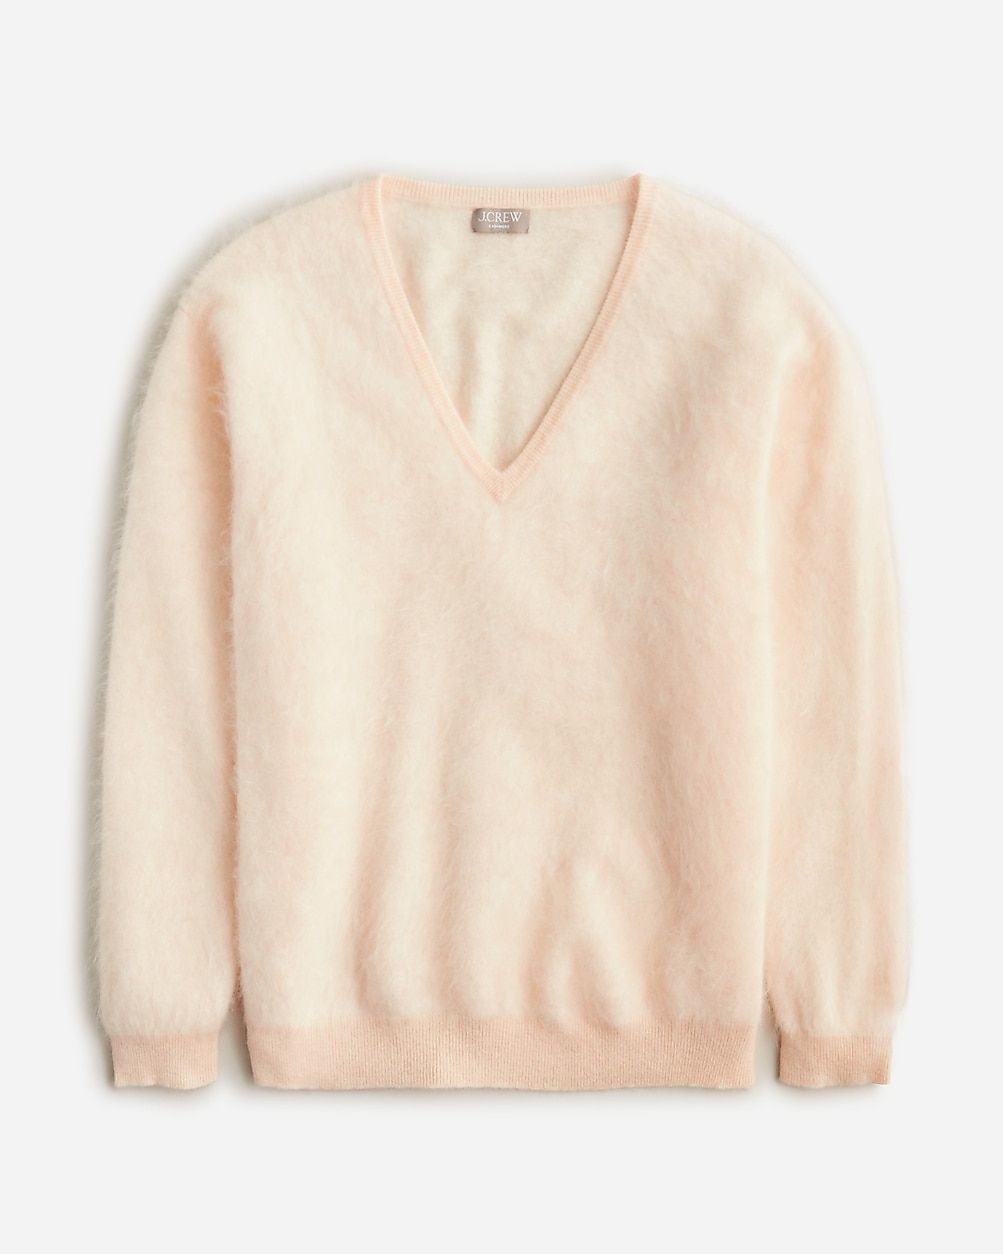 Brushed cashmere relaxed V-neck sweater | J.Crew US